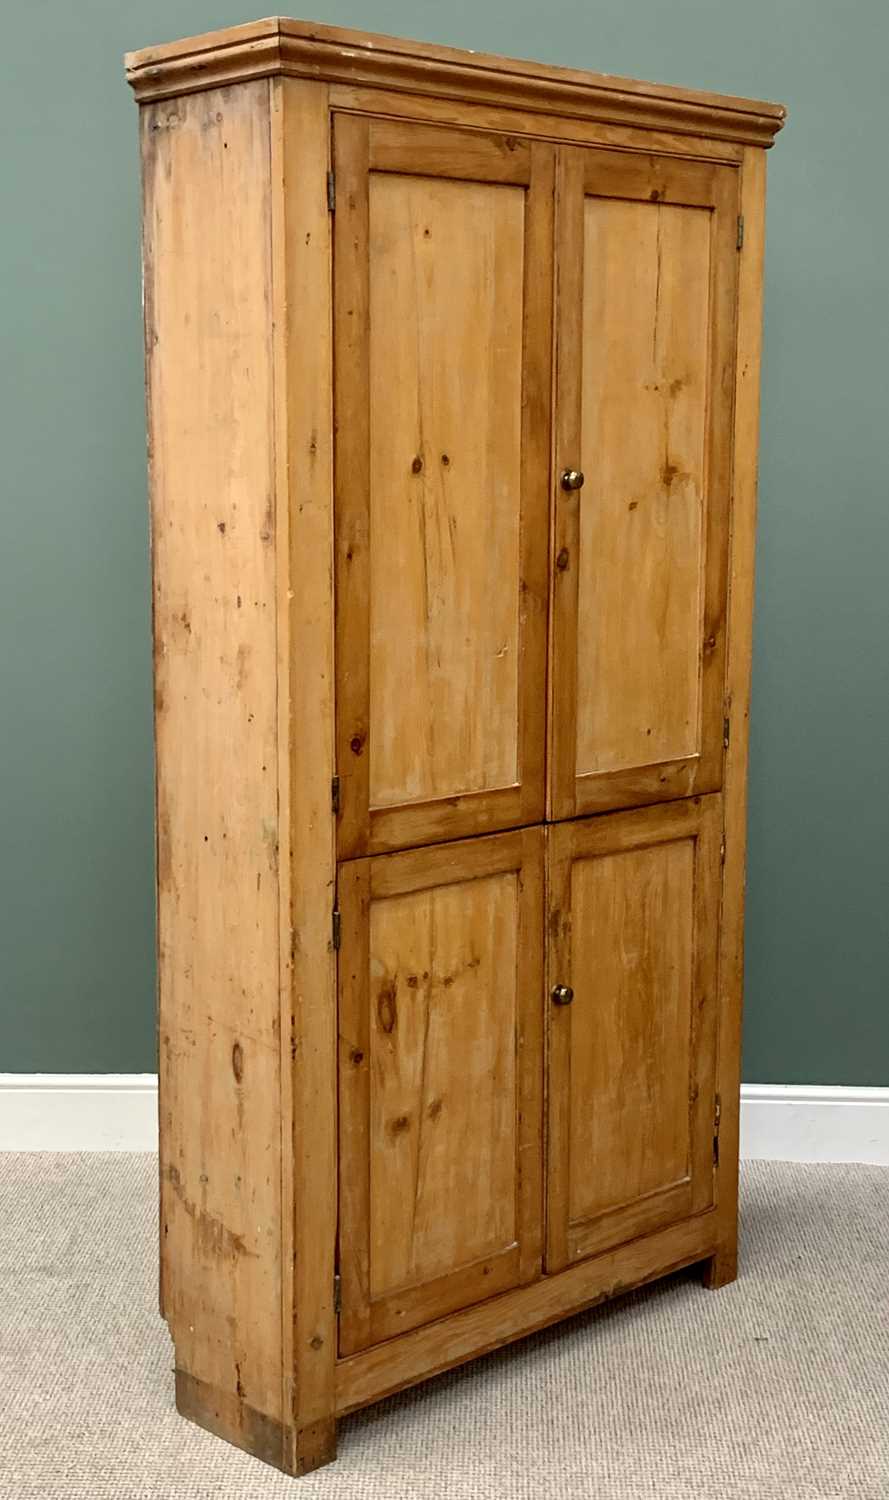 STRIPPED PINE FOUR DOOR CUPBOARD - with moulded cornice, the doors with brass knob handles, 208cms - Image 3 of 4